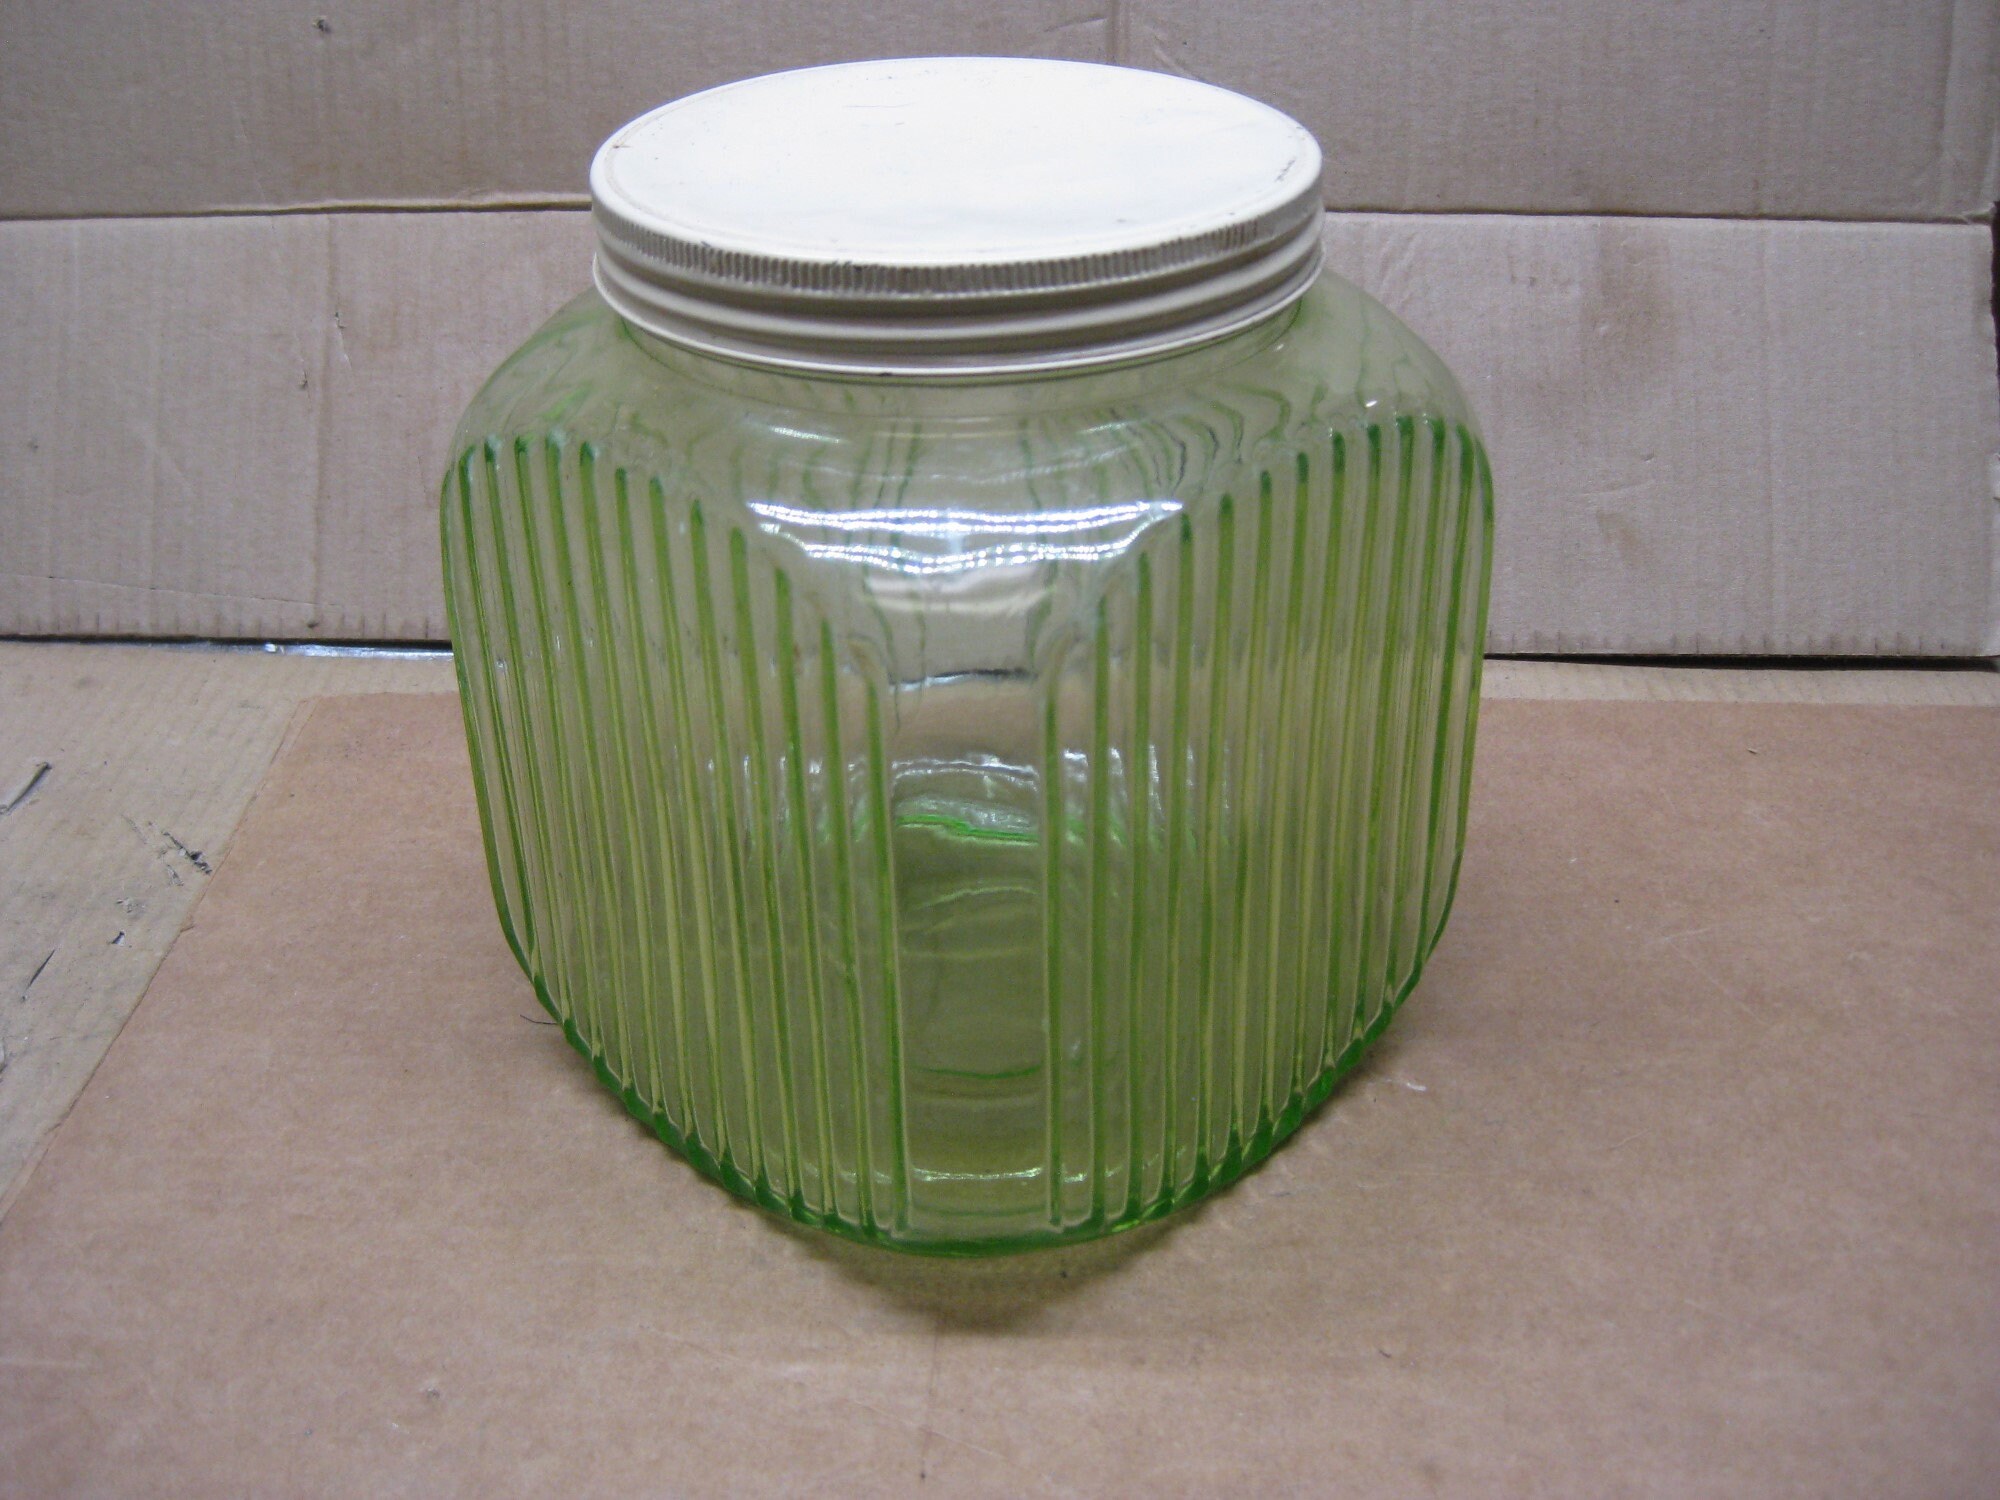 Vintage Green Royal Lace Cookie Jar Crafted by Hazel Atlas Glass 1930s,  Green Royal Lace Depression Glass Cookie Jar